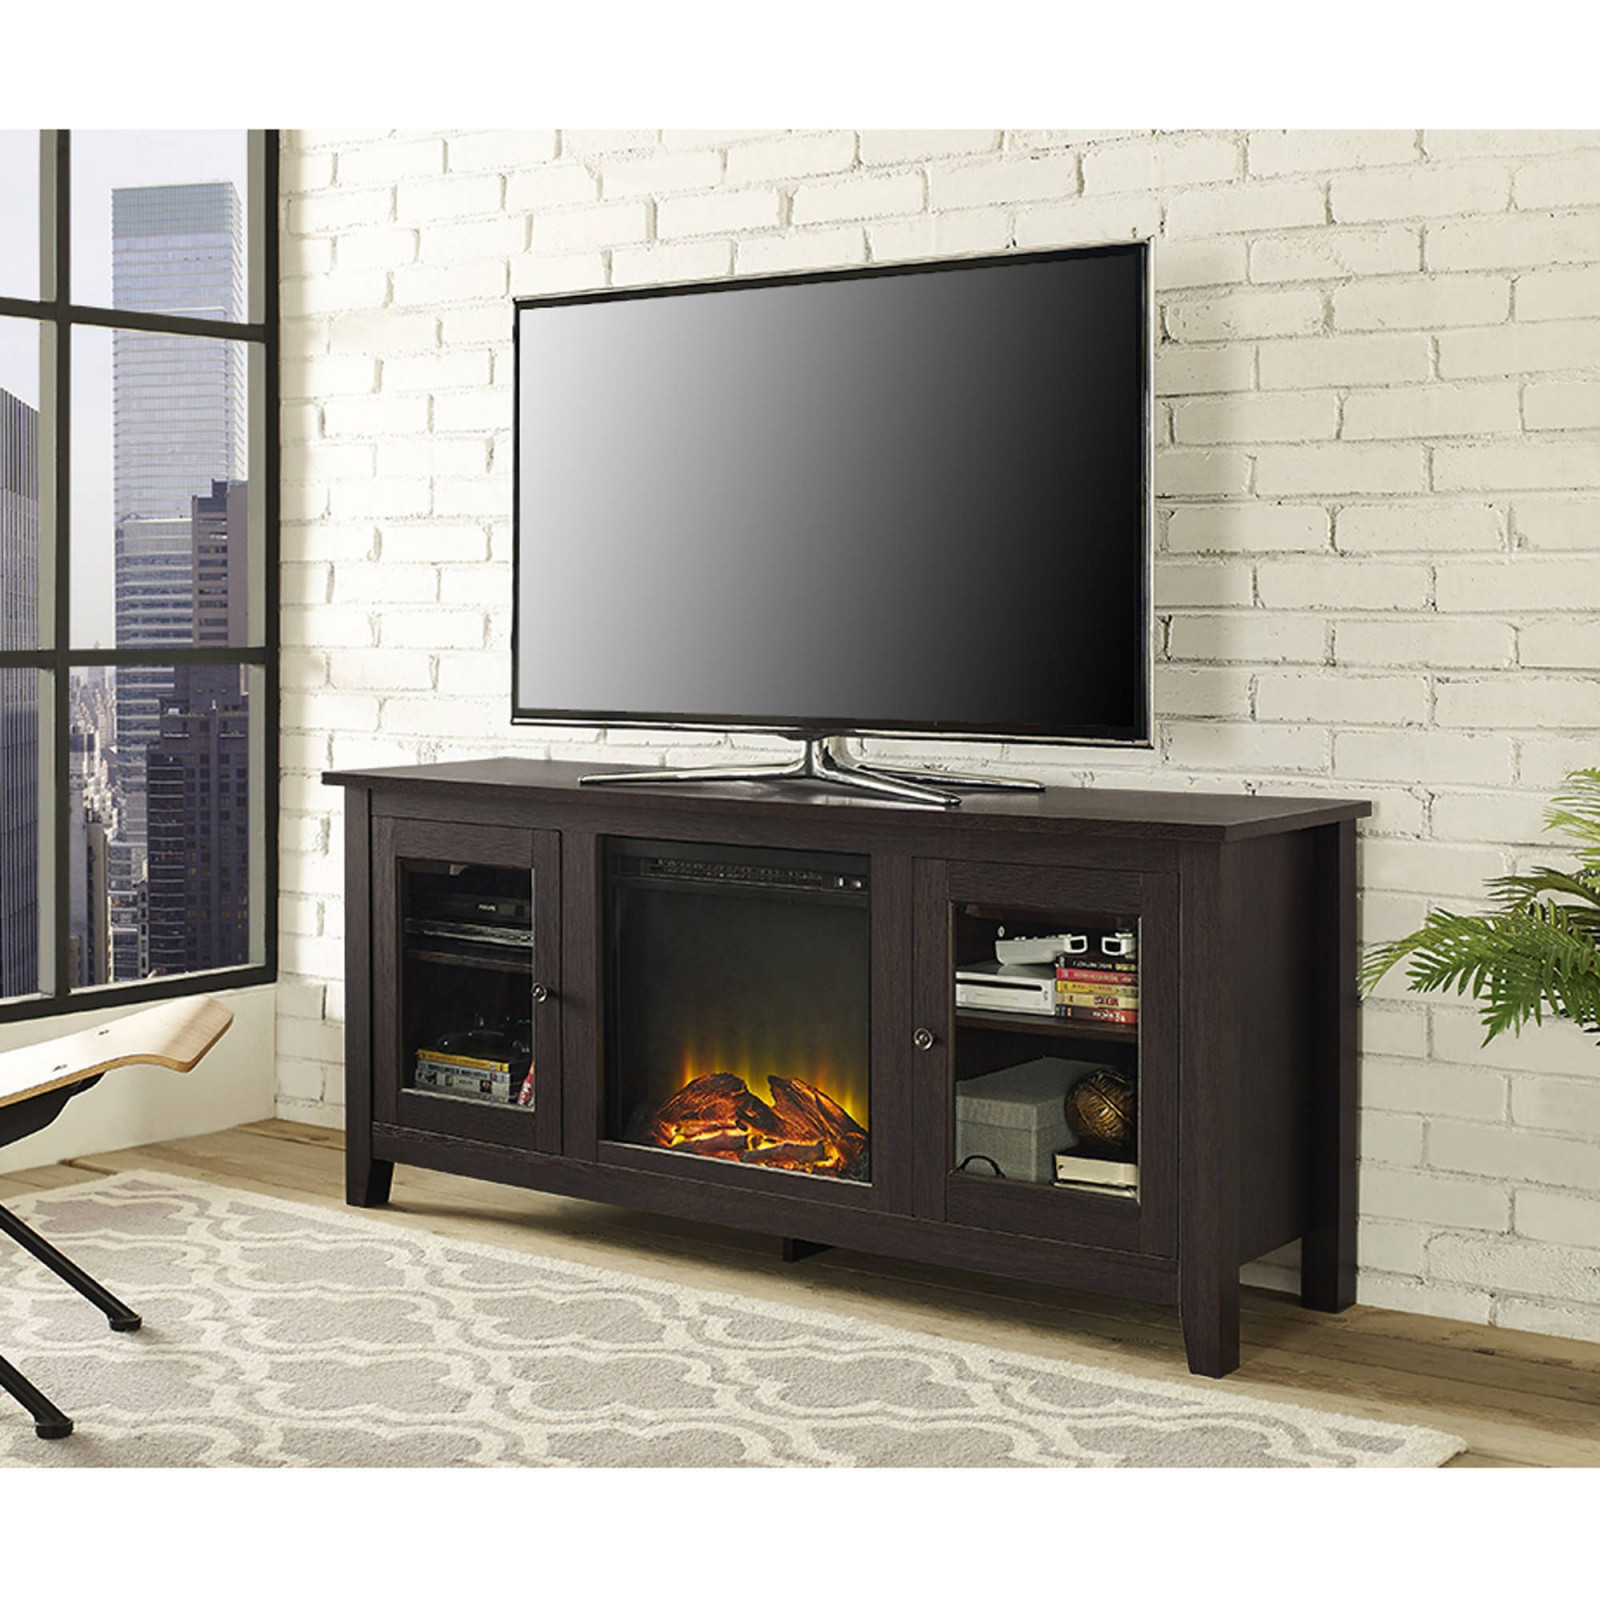 Mahogany Electric Fireplace Best Of 60 Inch Tv Stand Belle Pretty Corner Fireplace Tv Stand for